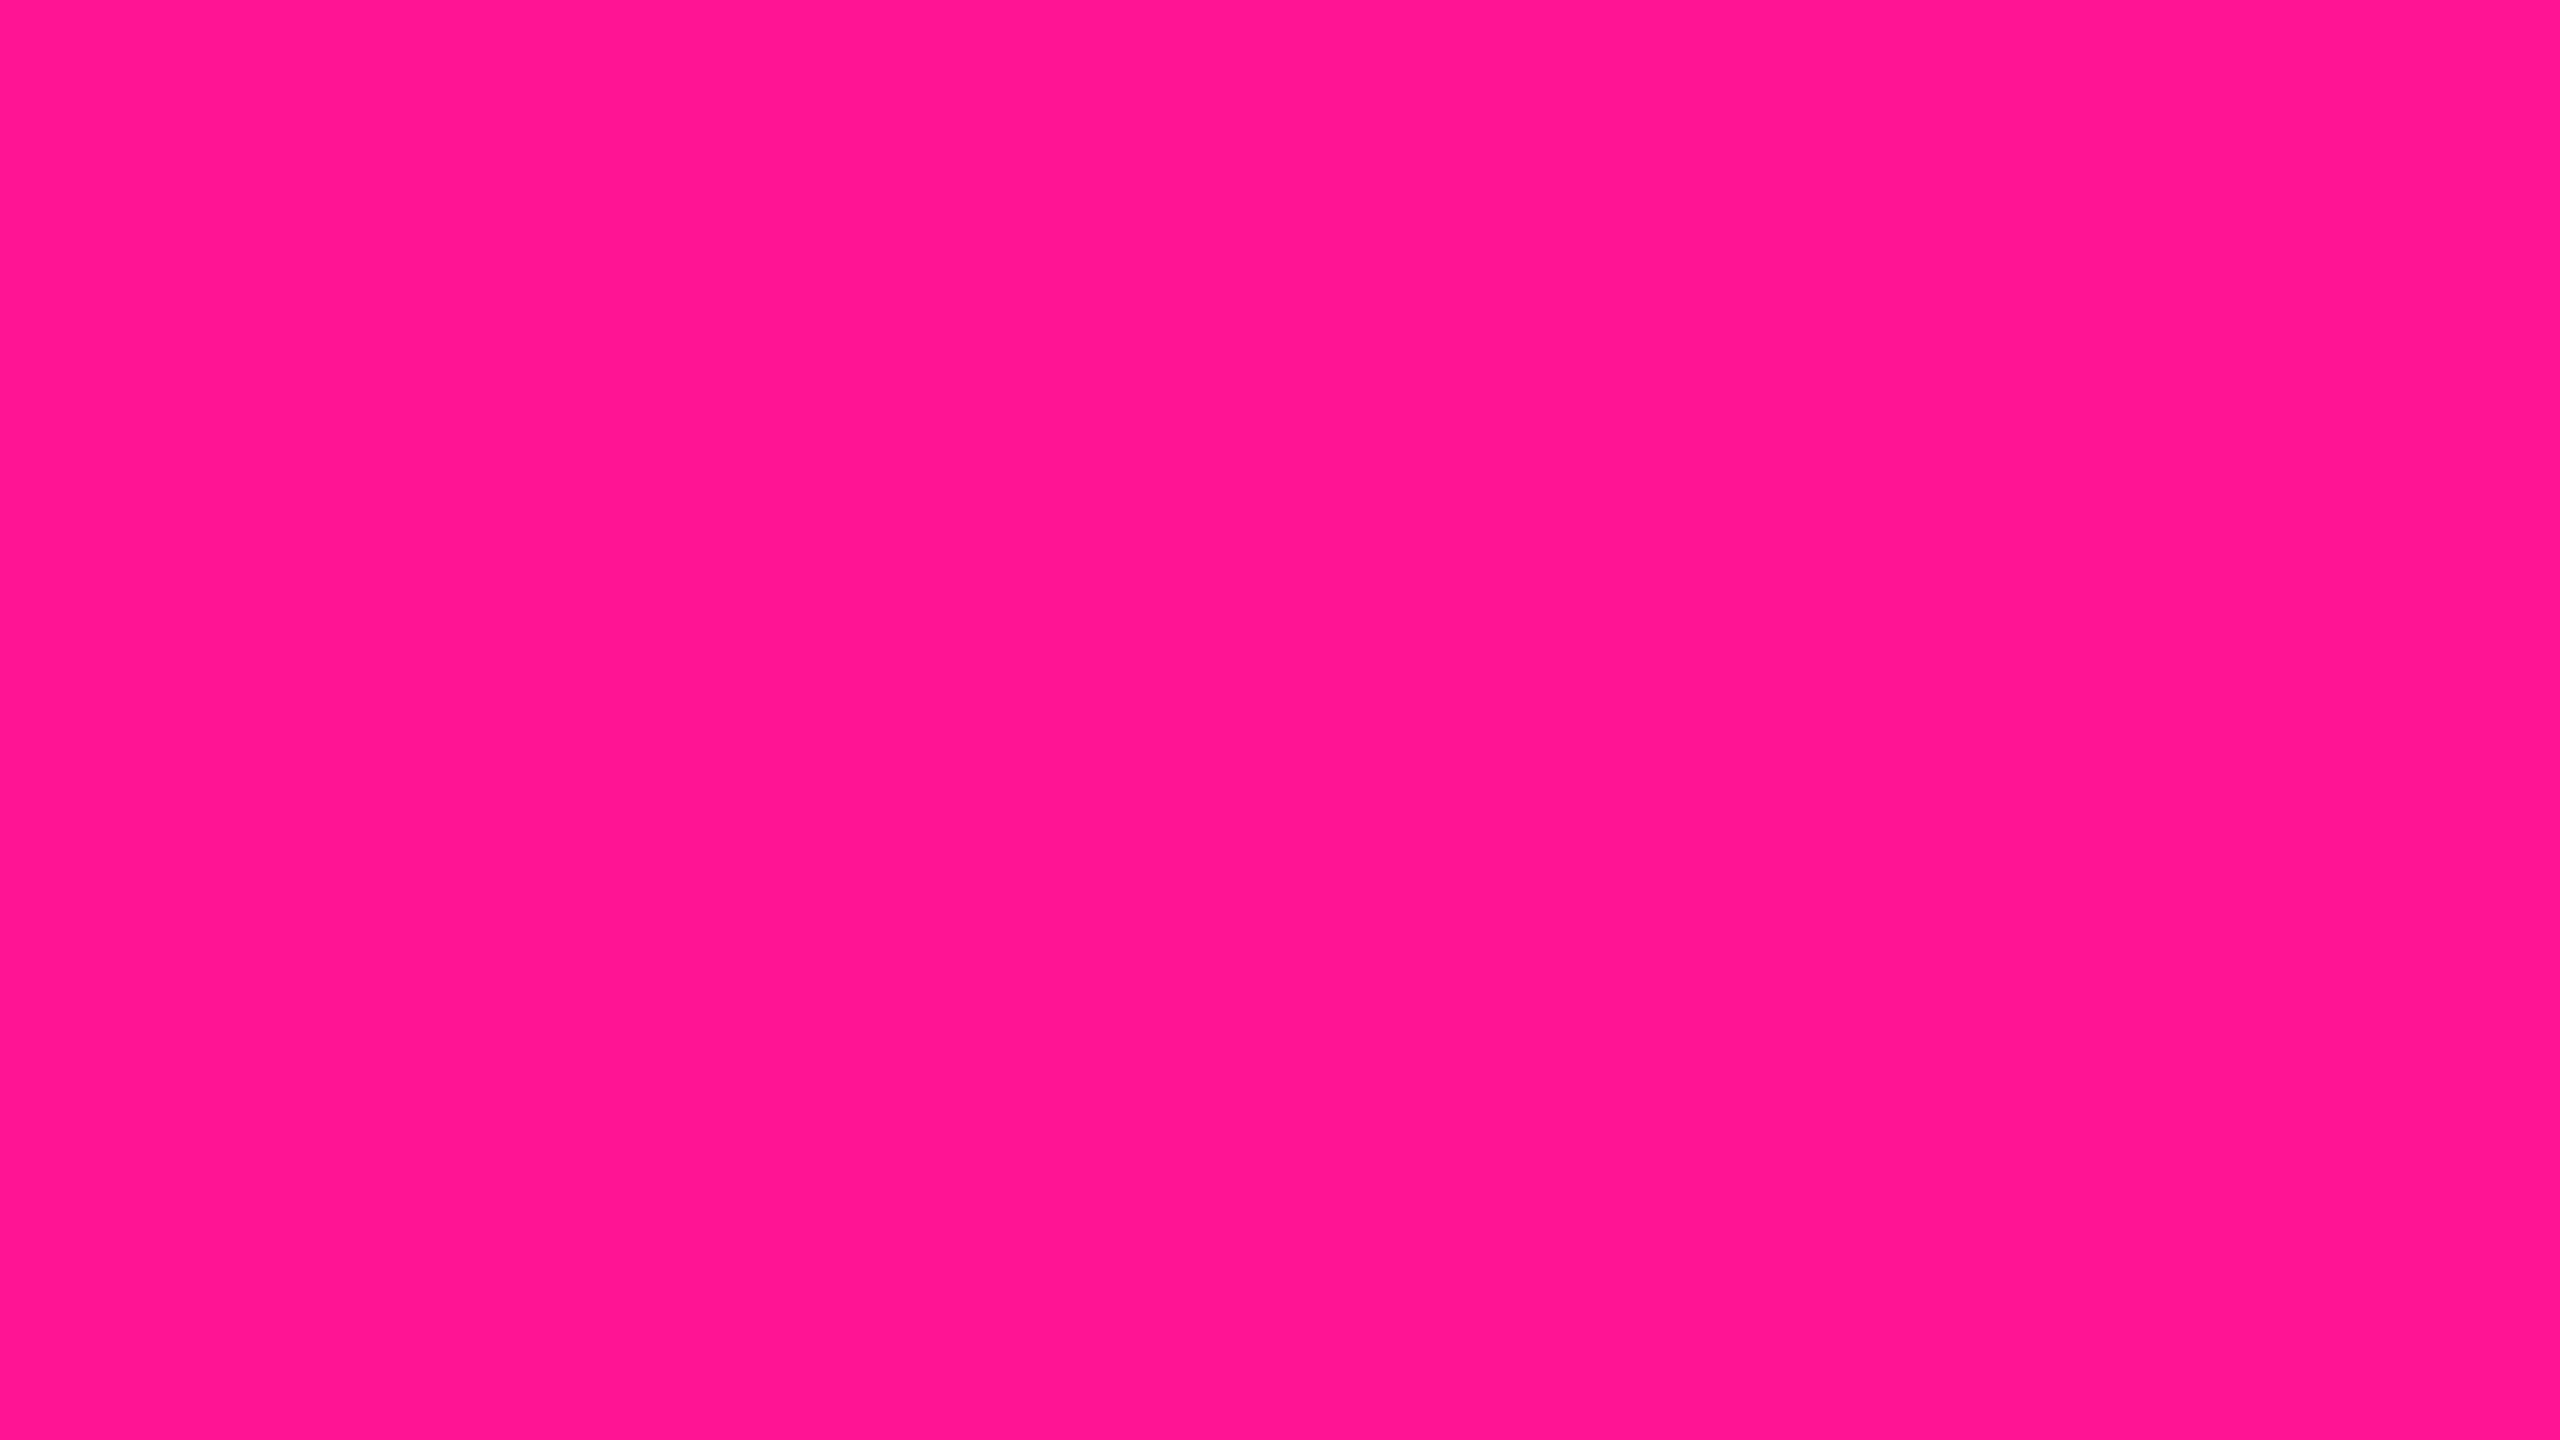 Solid Pink Wallpapers - Top Free Solid Pink Backgrounds - WallpaperAccess